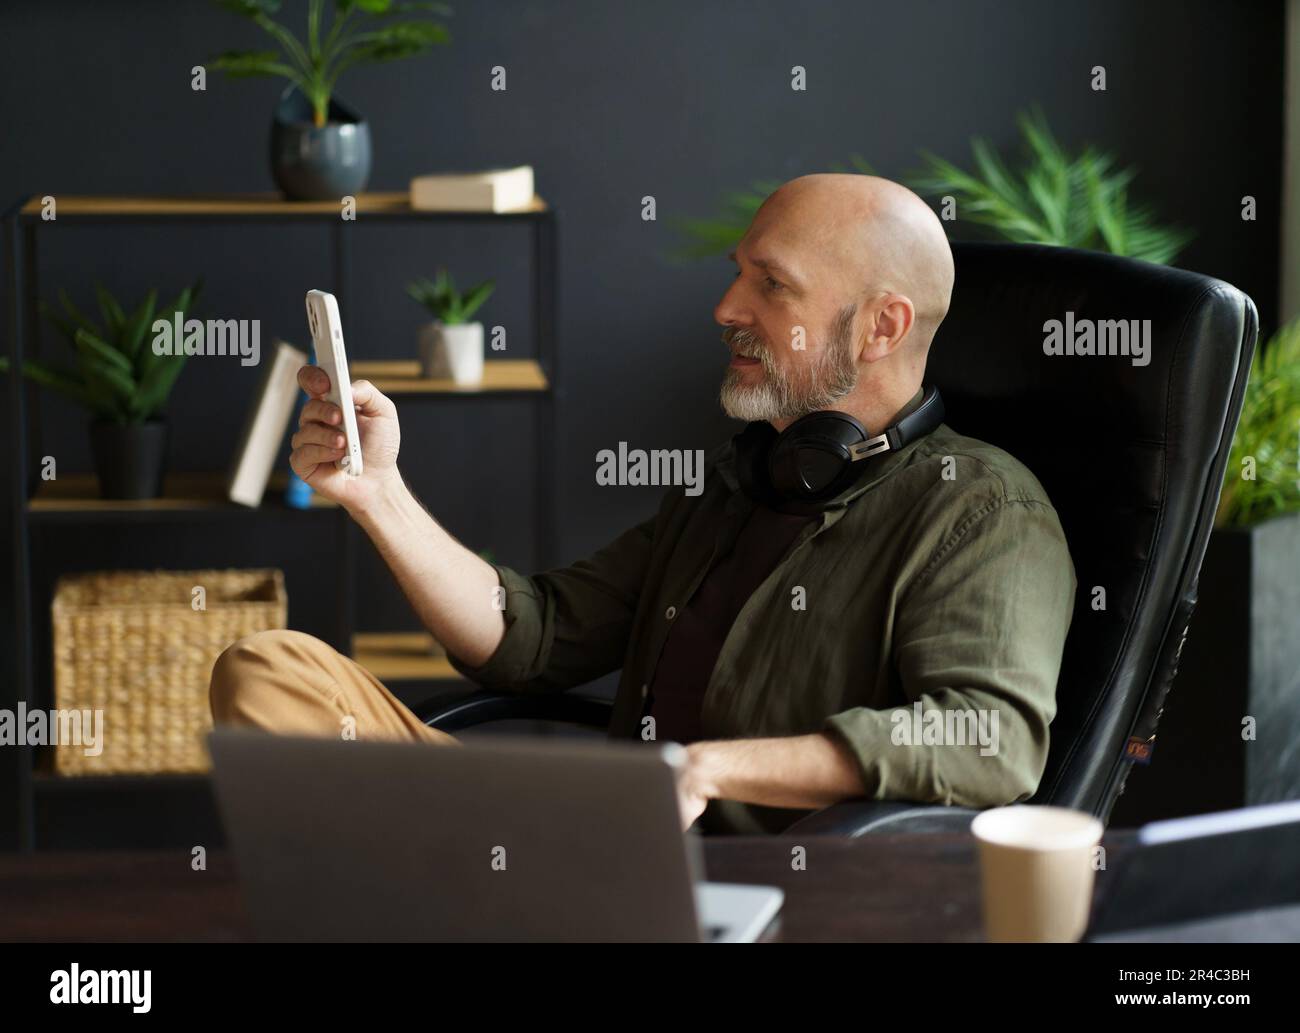 Smart and tech-savvy mid-aged man sits in chair at desk, engrossed in screen of phone. With bald head, silver beard, and air of handsomeness, multitasks, balancing phone, laptop, and cup of coffee. High quality photo Stock Photo